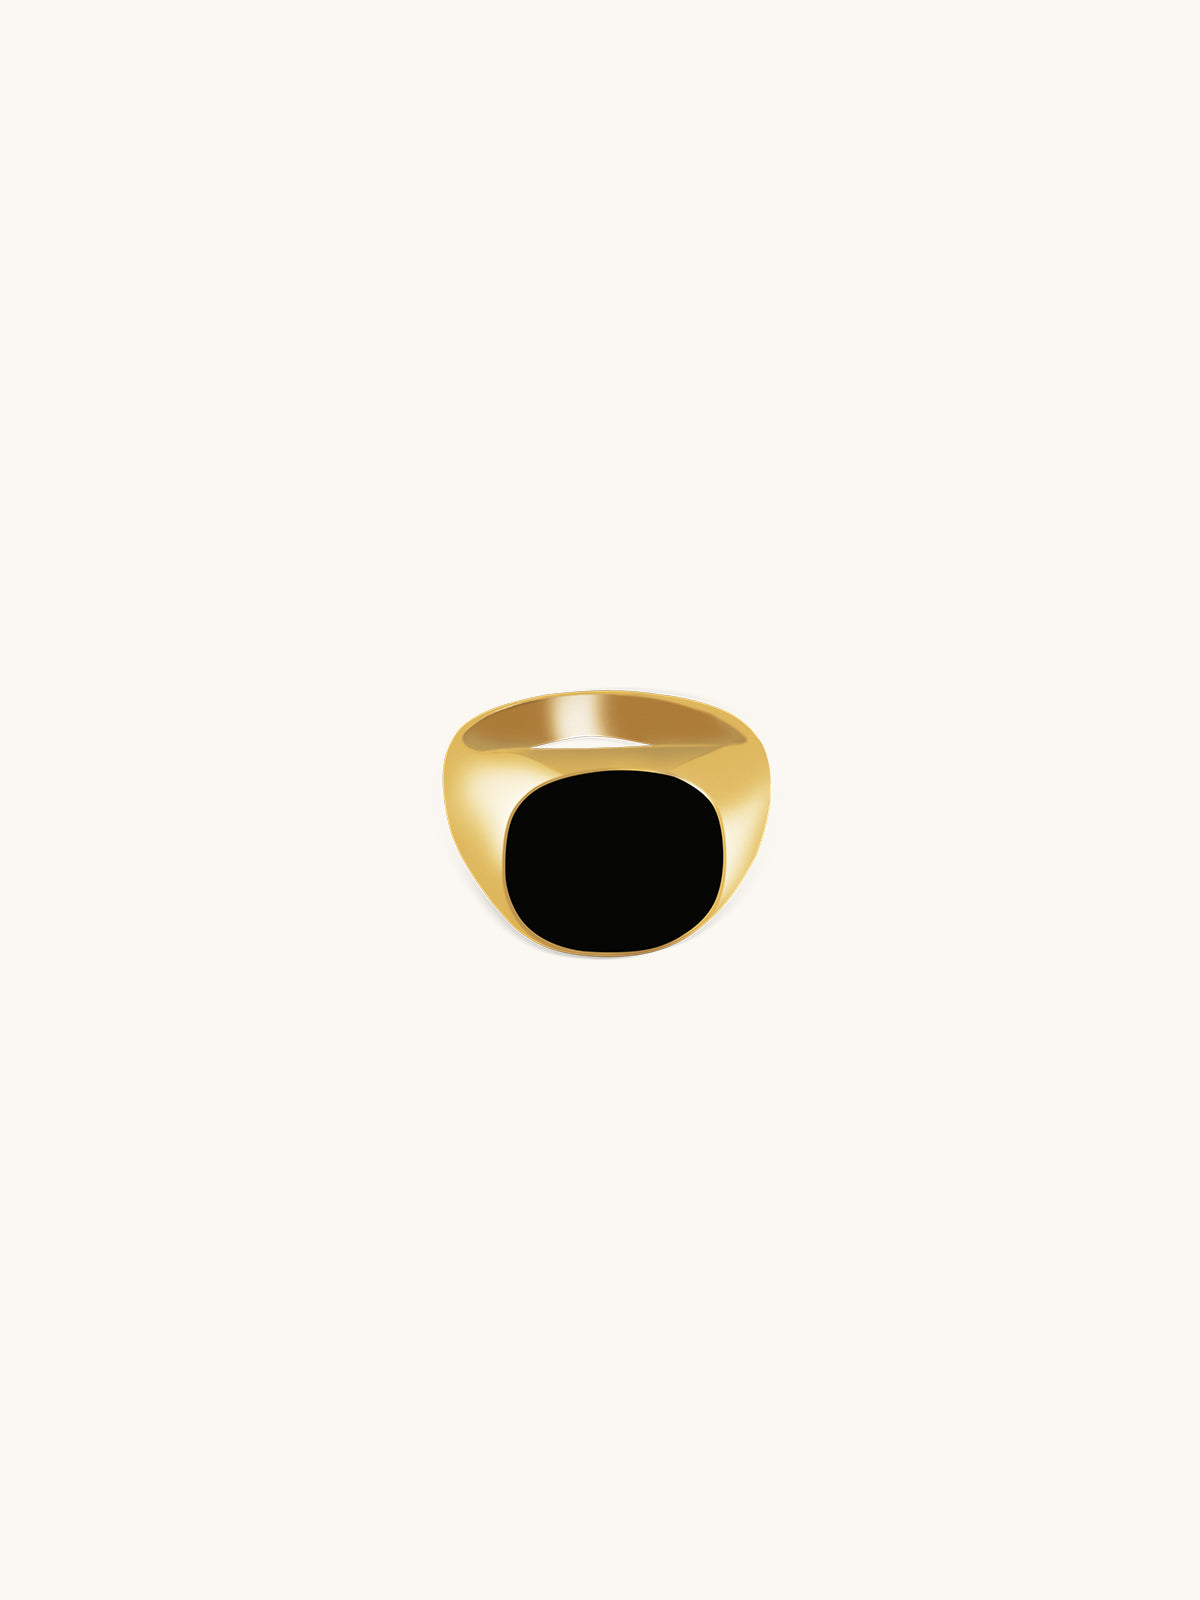 Round Square Oil Drop Ring